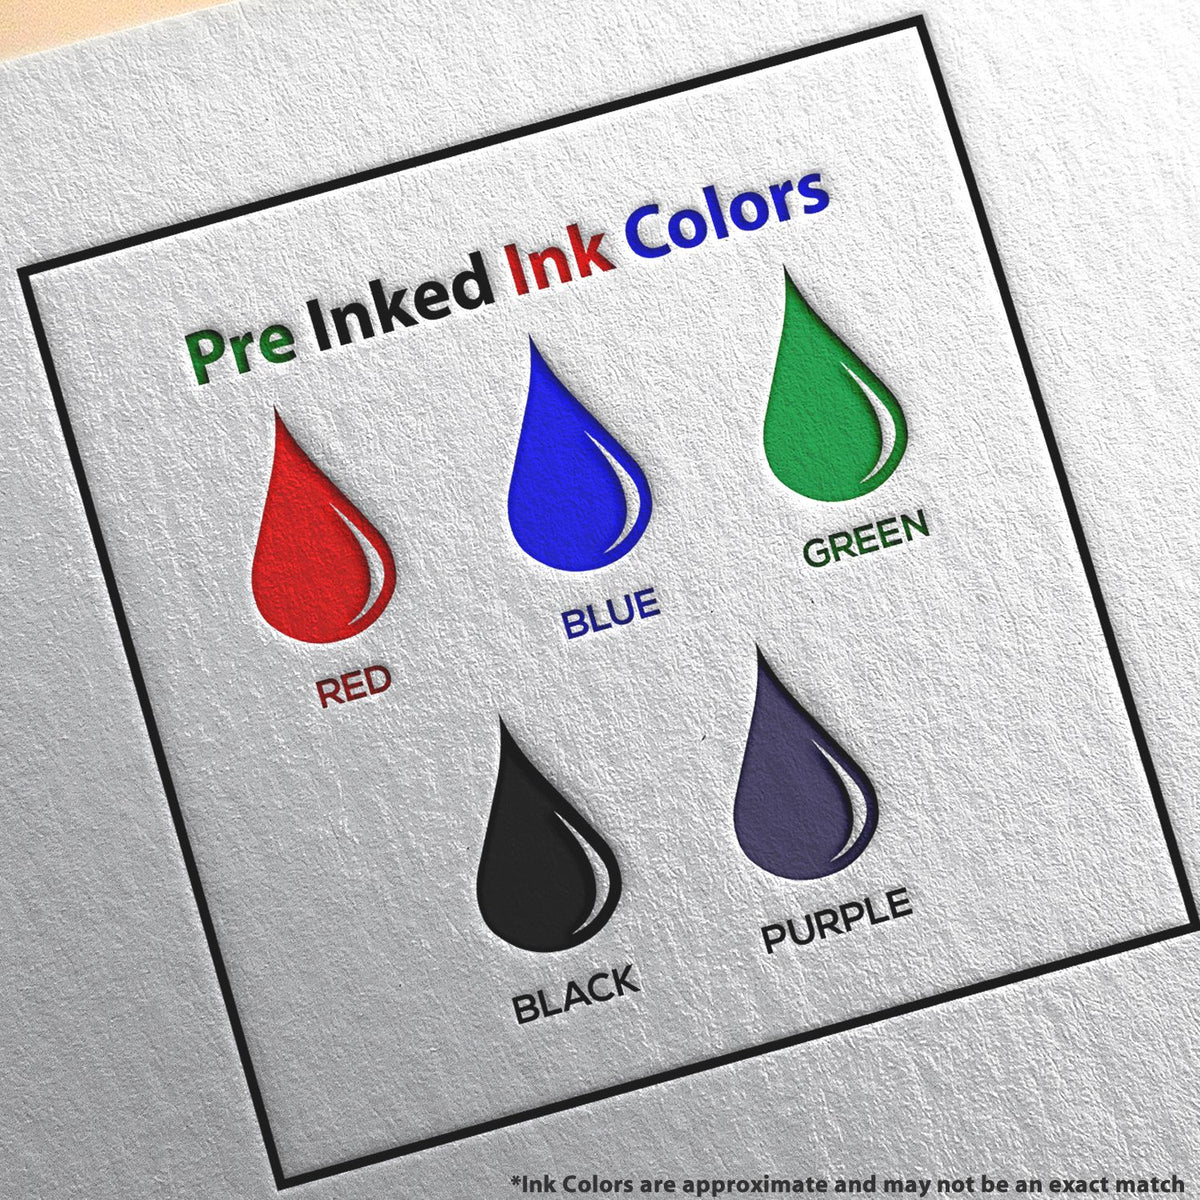 A picture showing the different ink colors or hues available for the Premium MaxLight Pre-Inked New Jersey Landscape Architectural Stamp product.